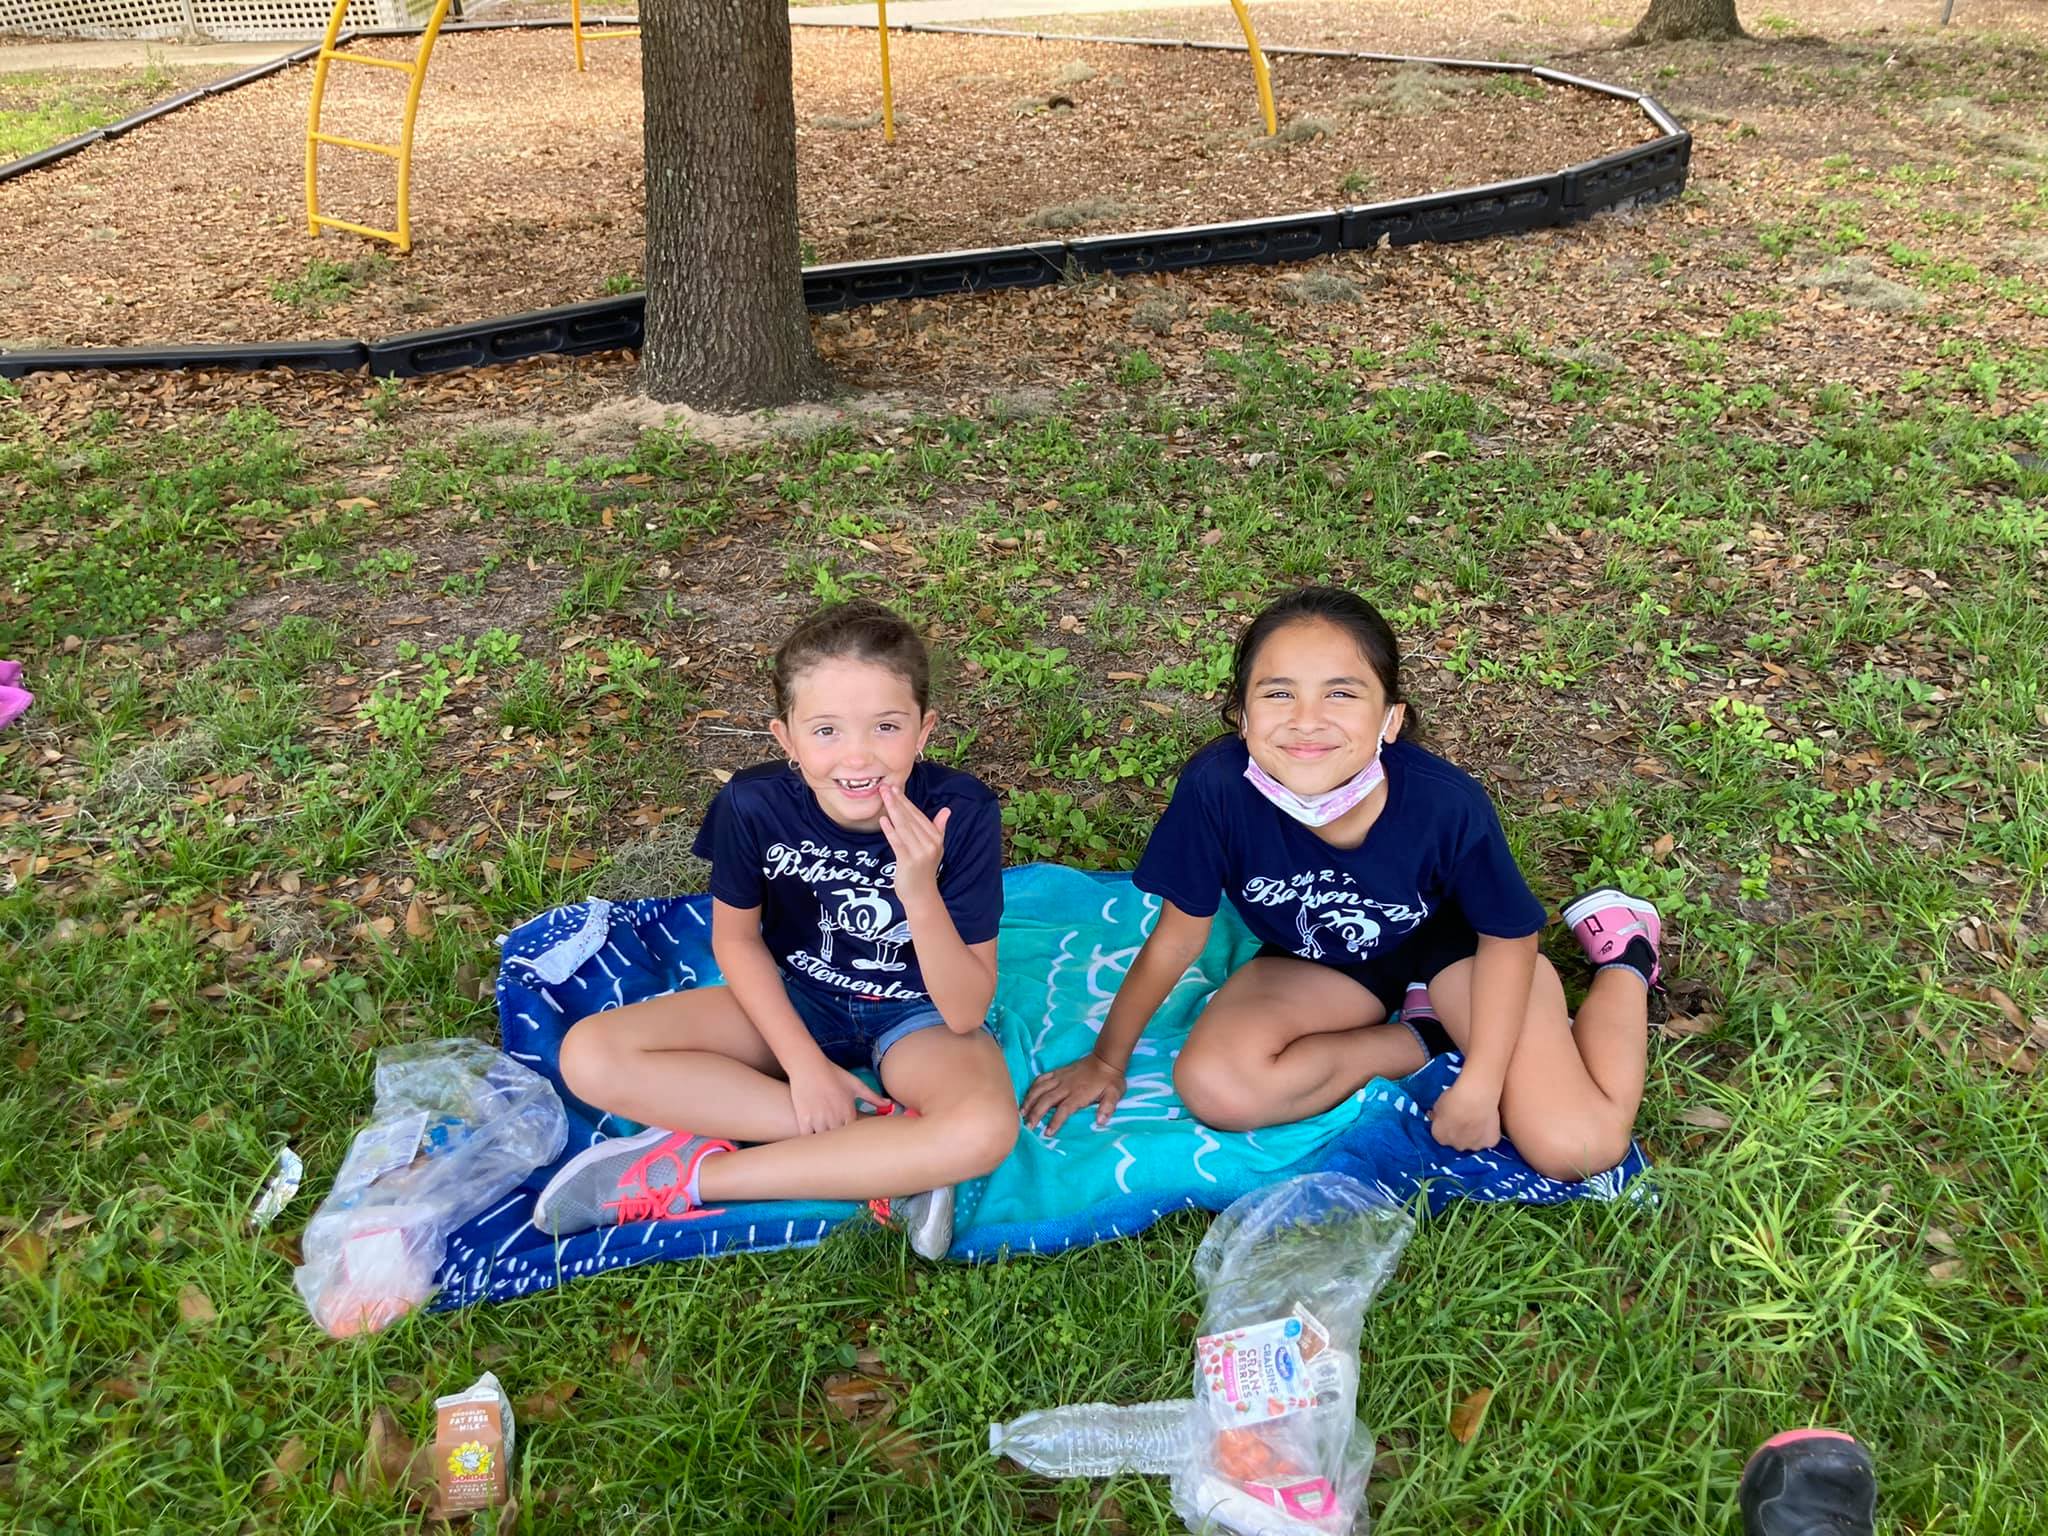 Students enjoying their picnic lunch.